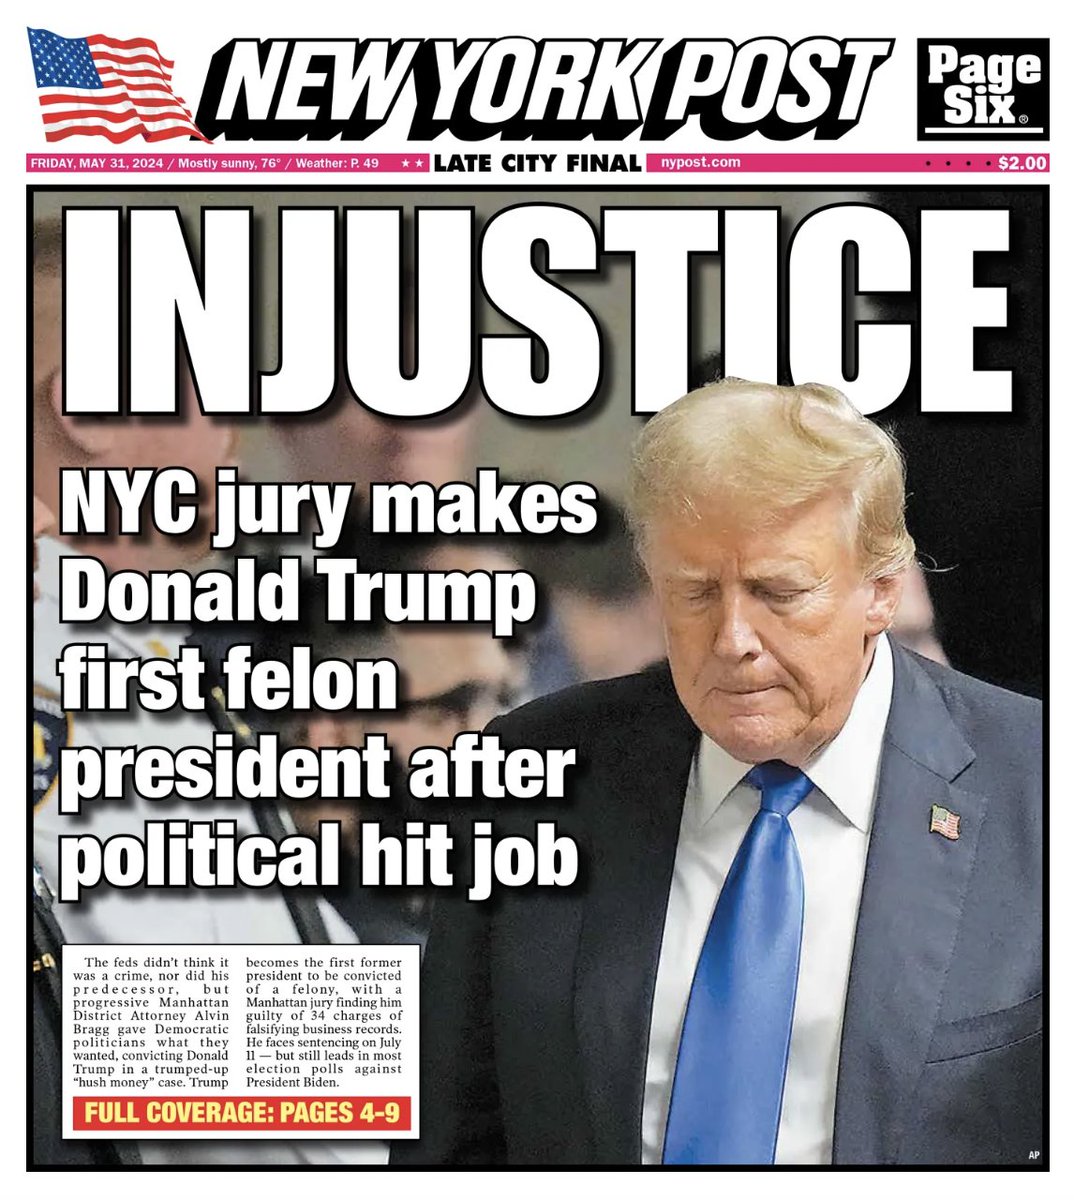 Most accurate headline I’ve seen in a while – this was a political weaponization of our judicial system, not justice.